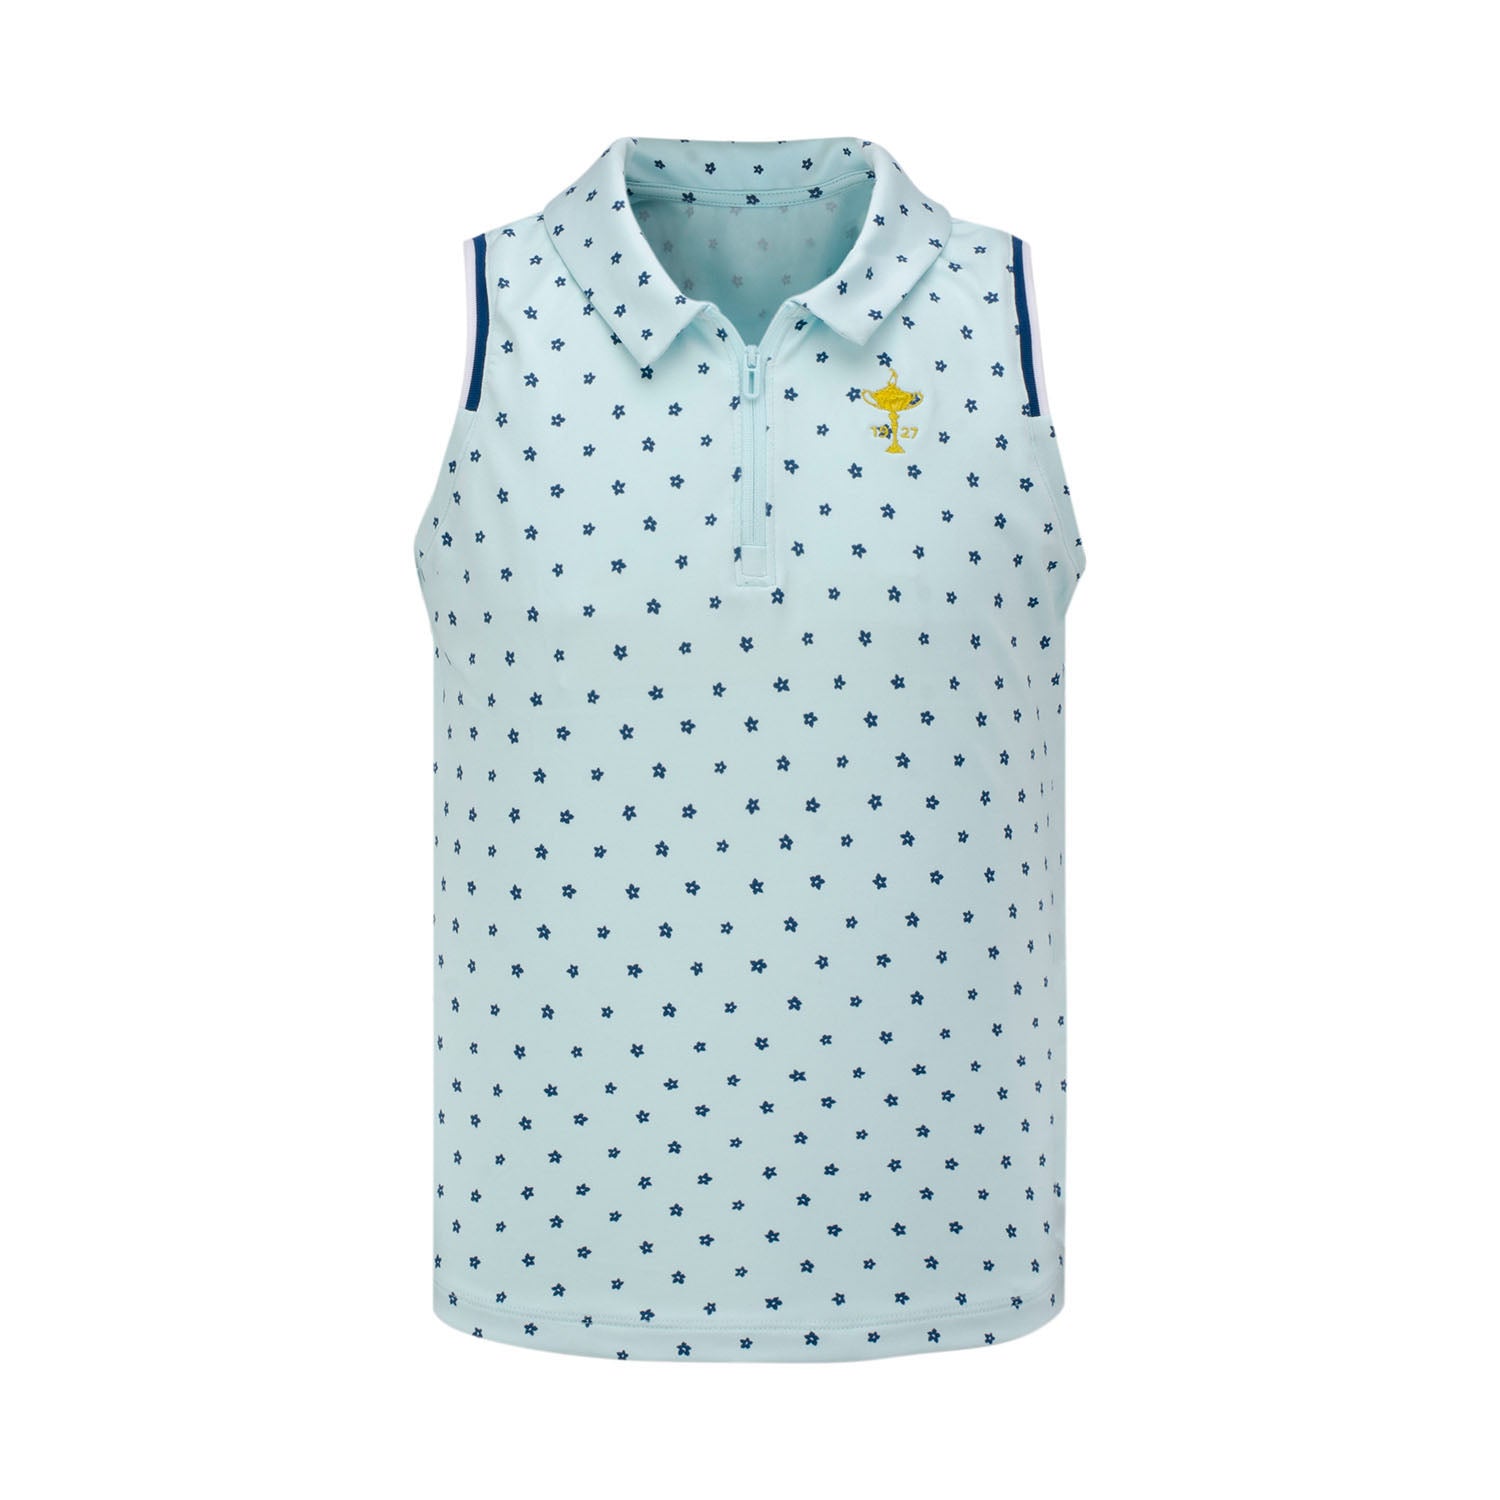 Under Armor Zinger SS Novelty Polo-Mineral blue - Ladies